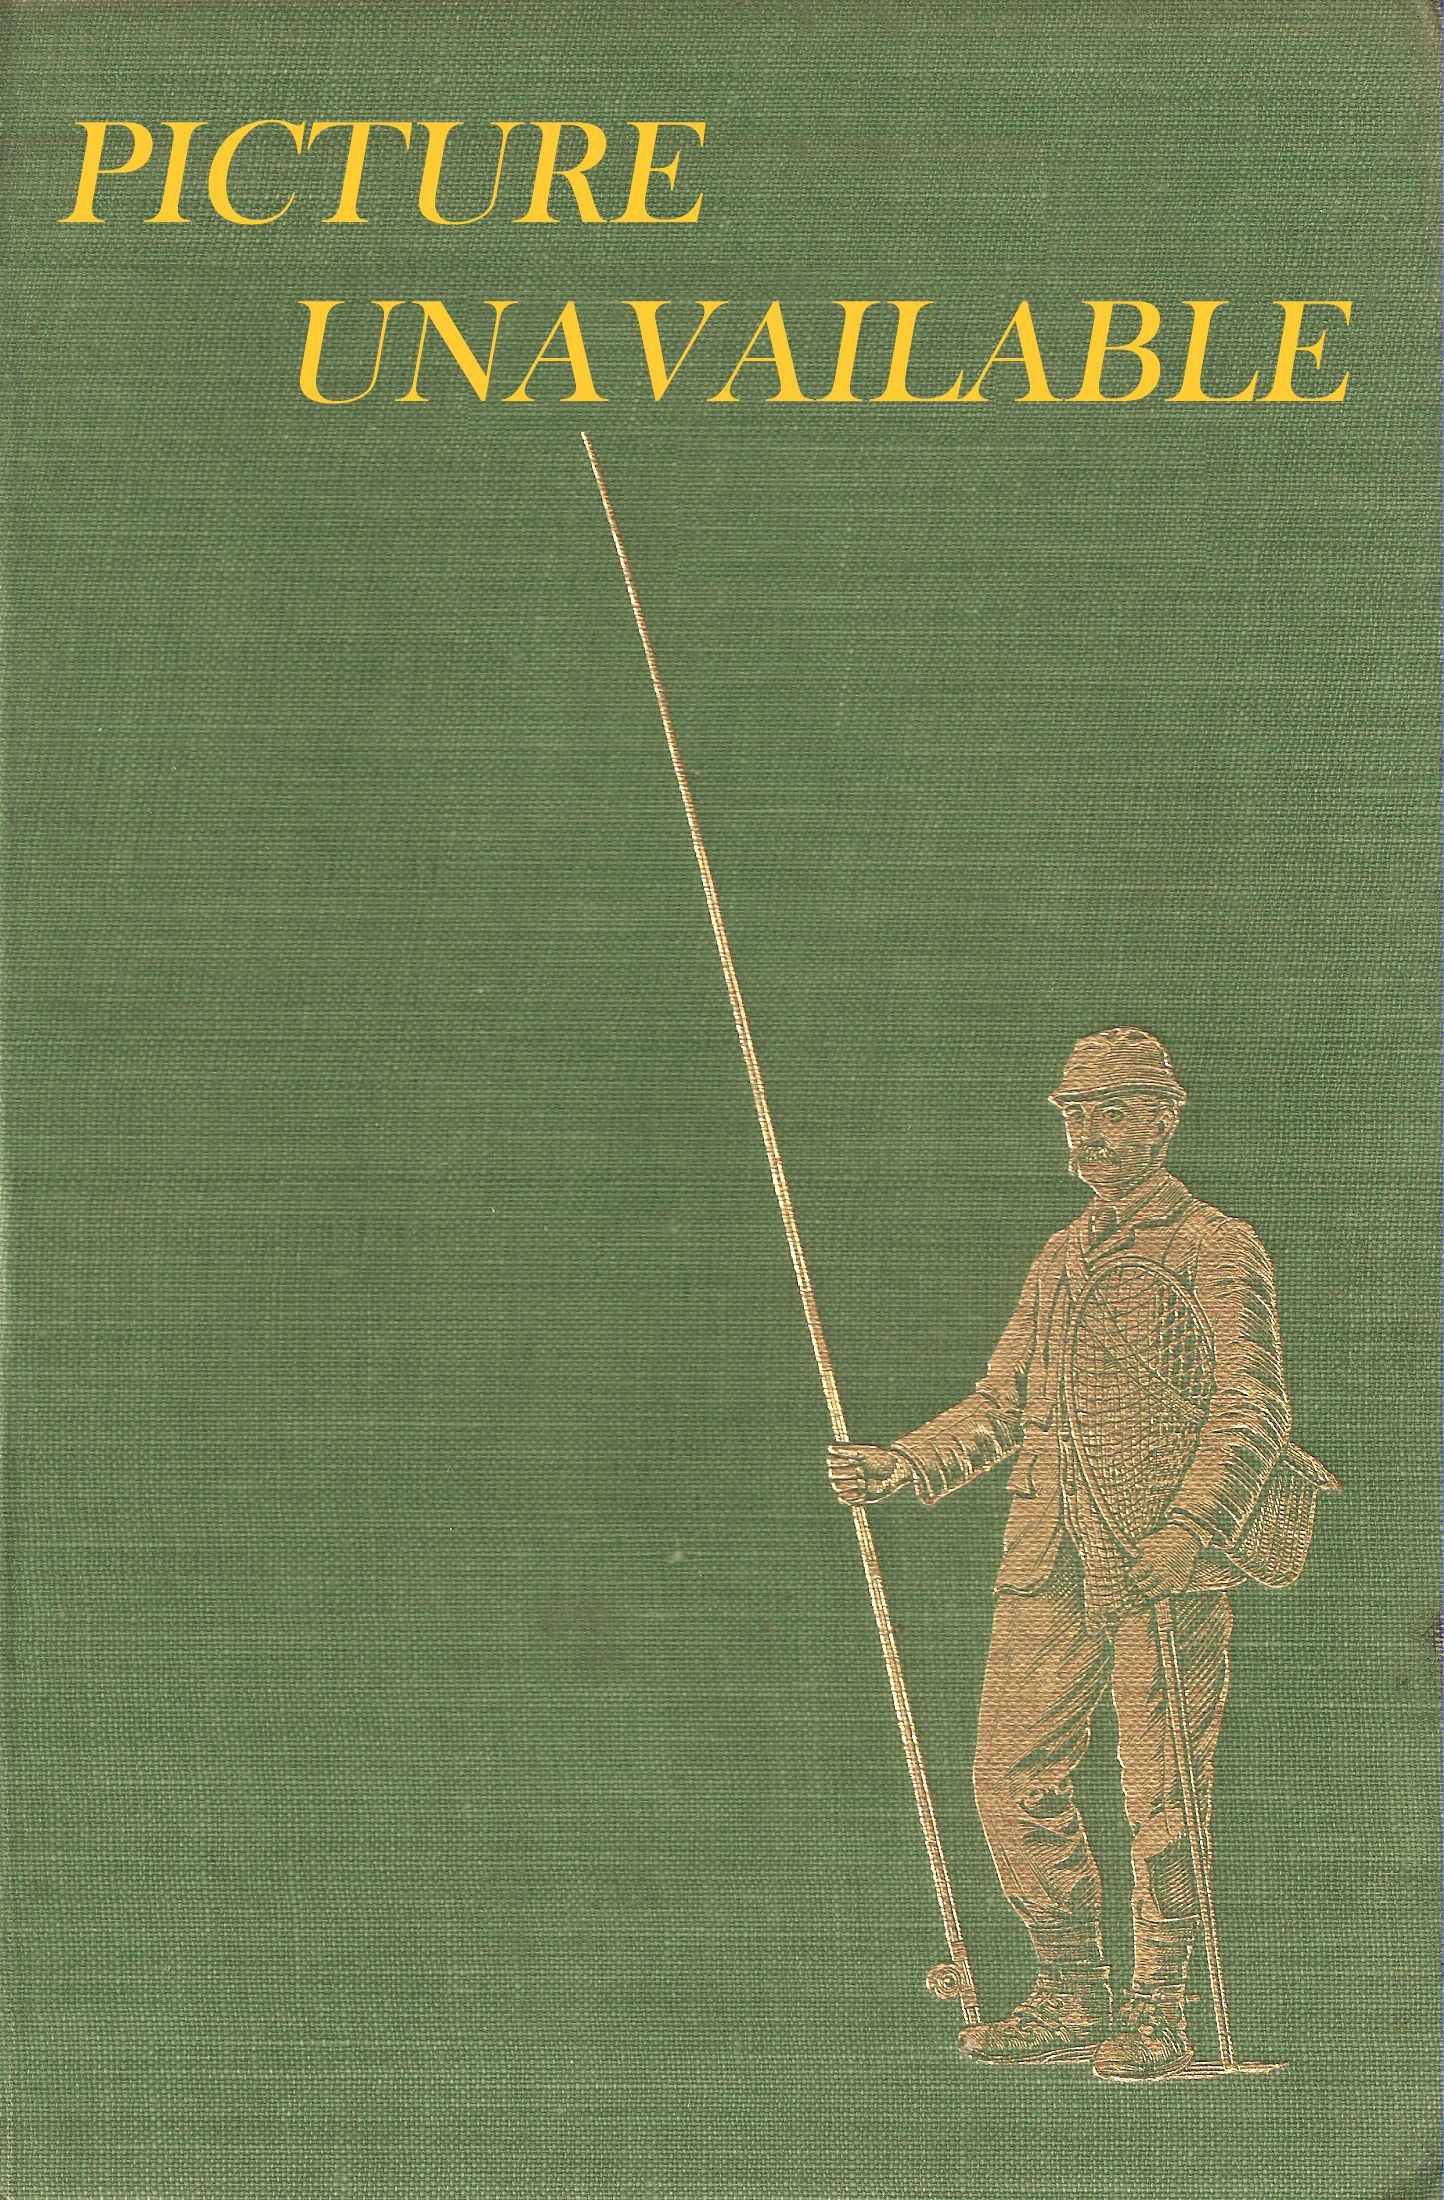 THE FLY-FISHERS' CLUB: LIBRARY CATALOGUE 1935. Prepared by Eric Taverner and Douglas Service.